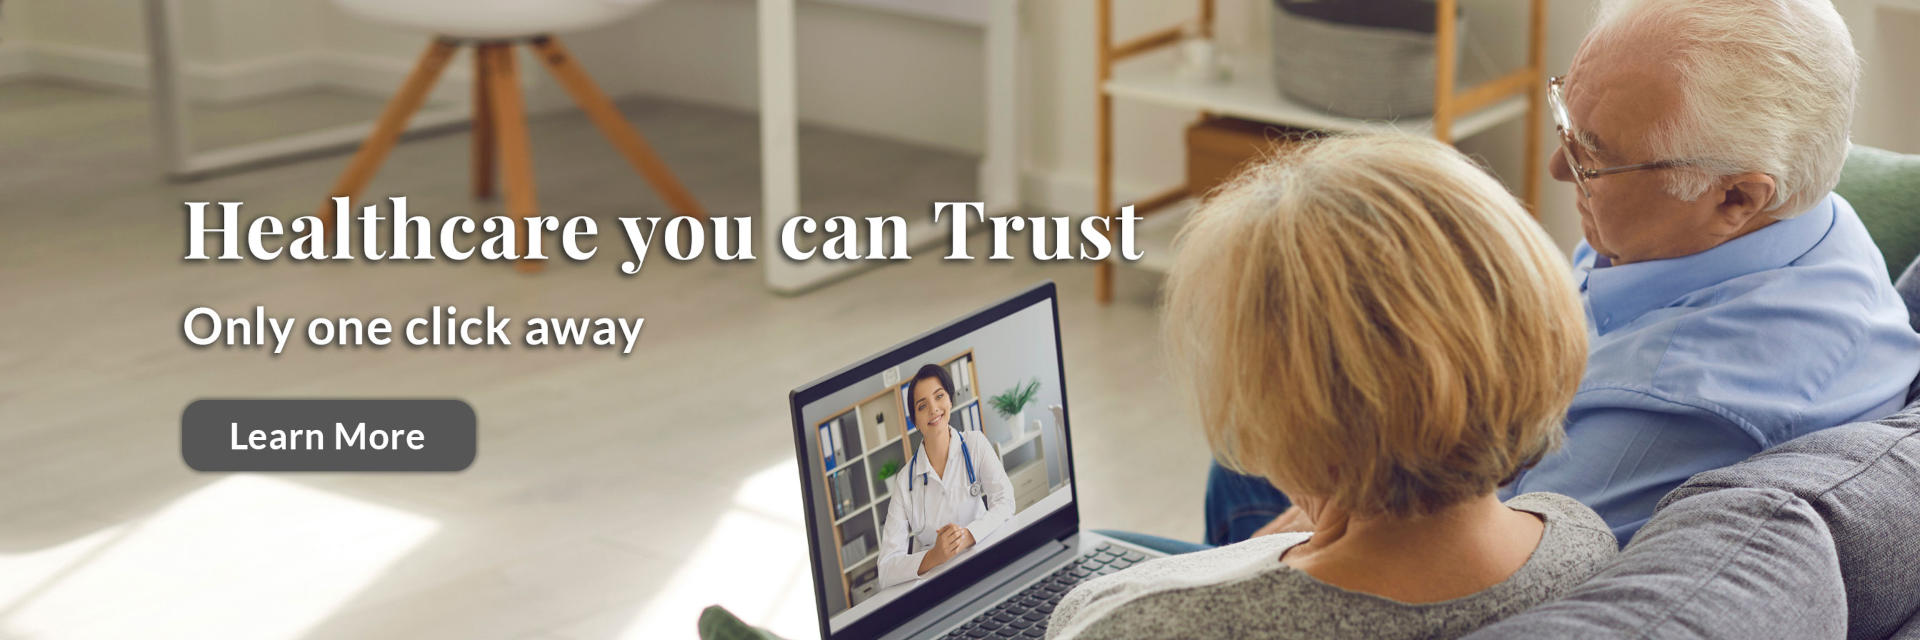 Healthcare you can Trust
Only one click away
Learn More